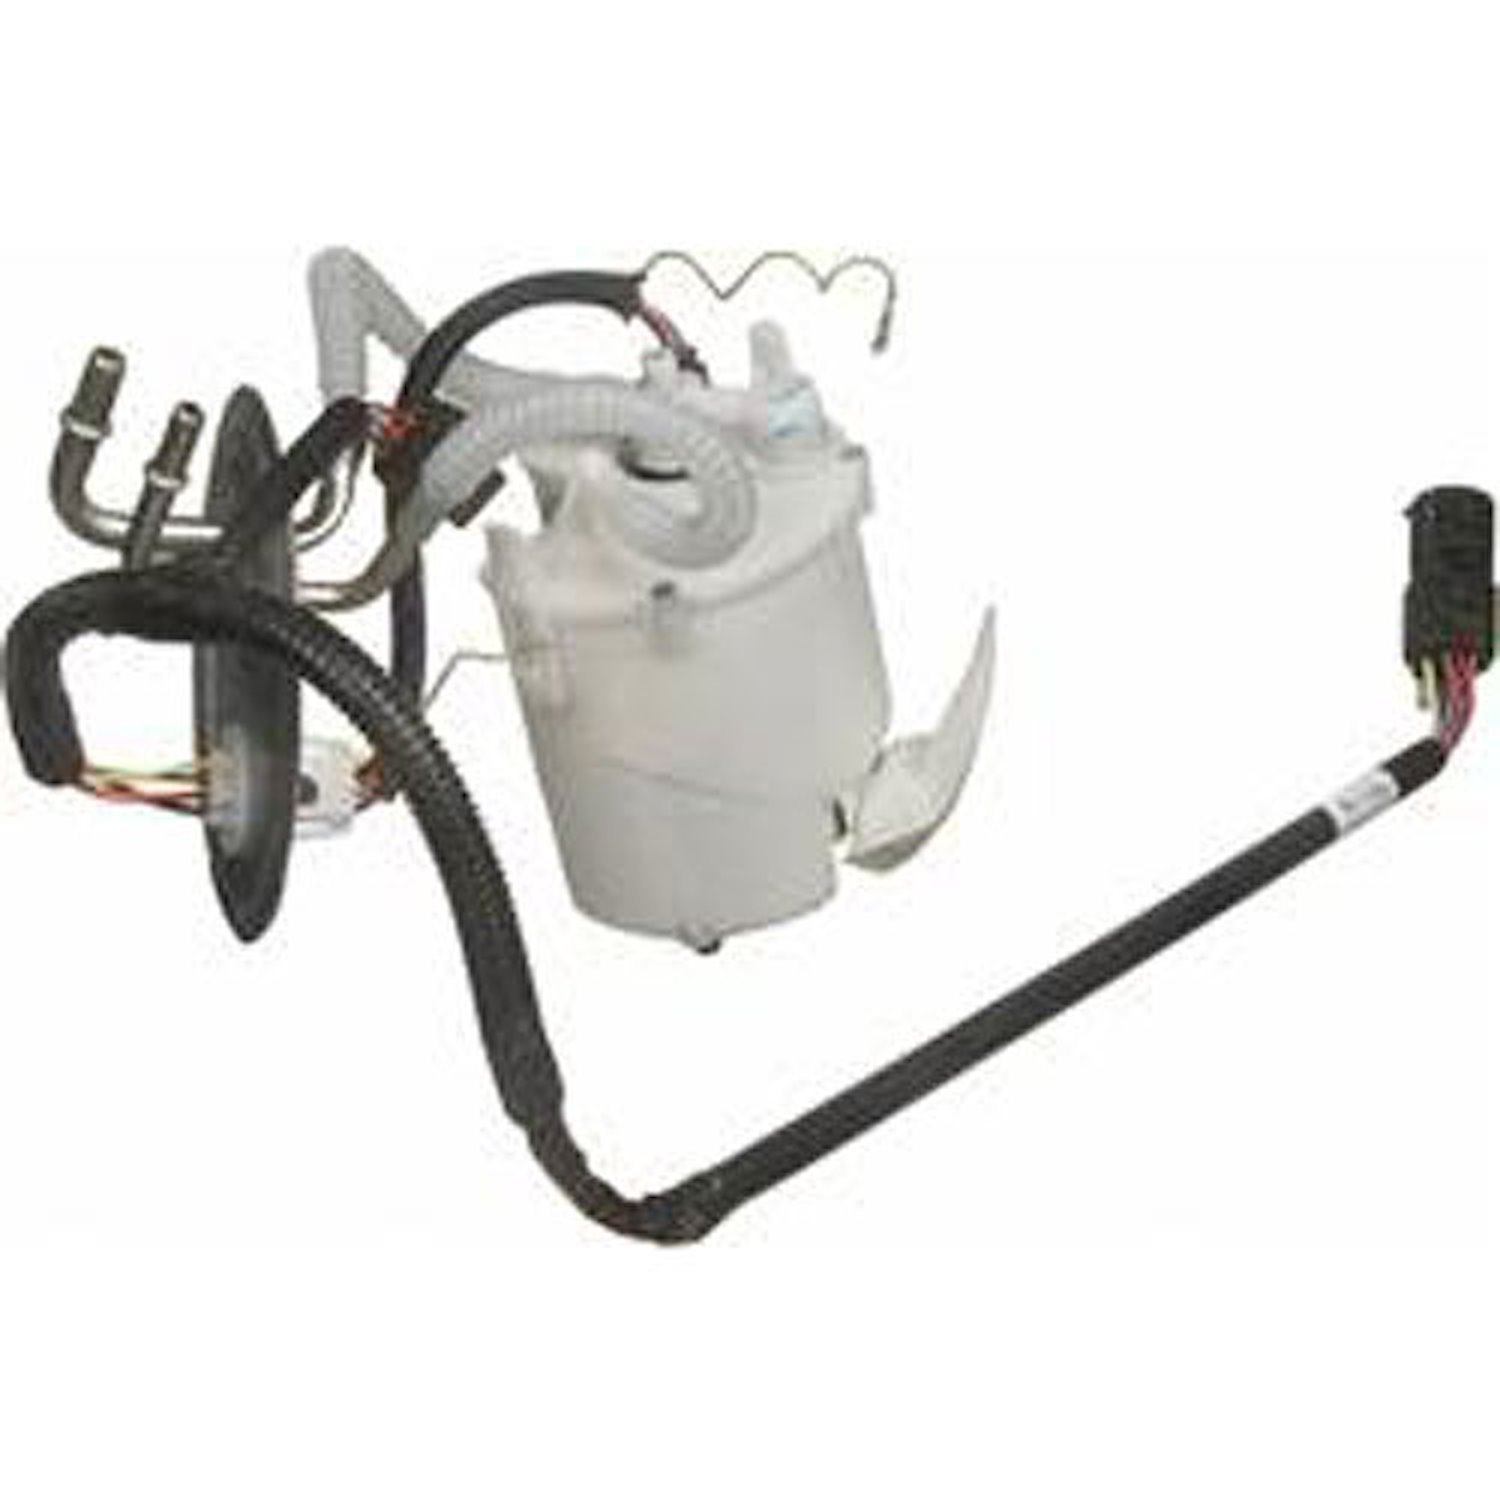 OE Ford Replacement Electric Fuel Pump Module Assembly 1999 Ford Taurus 3.0L V6